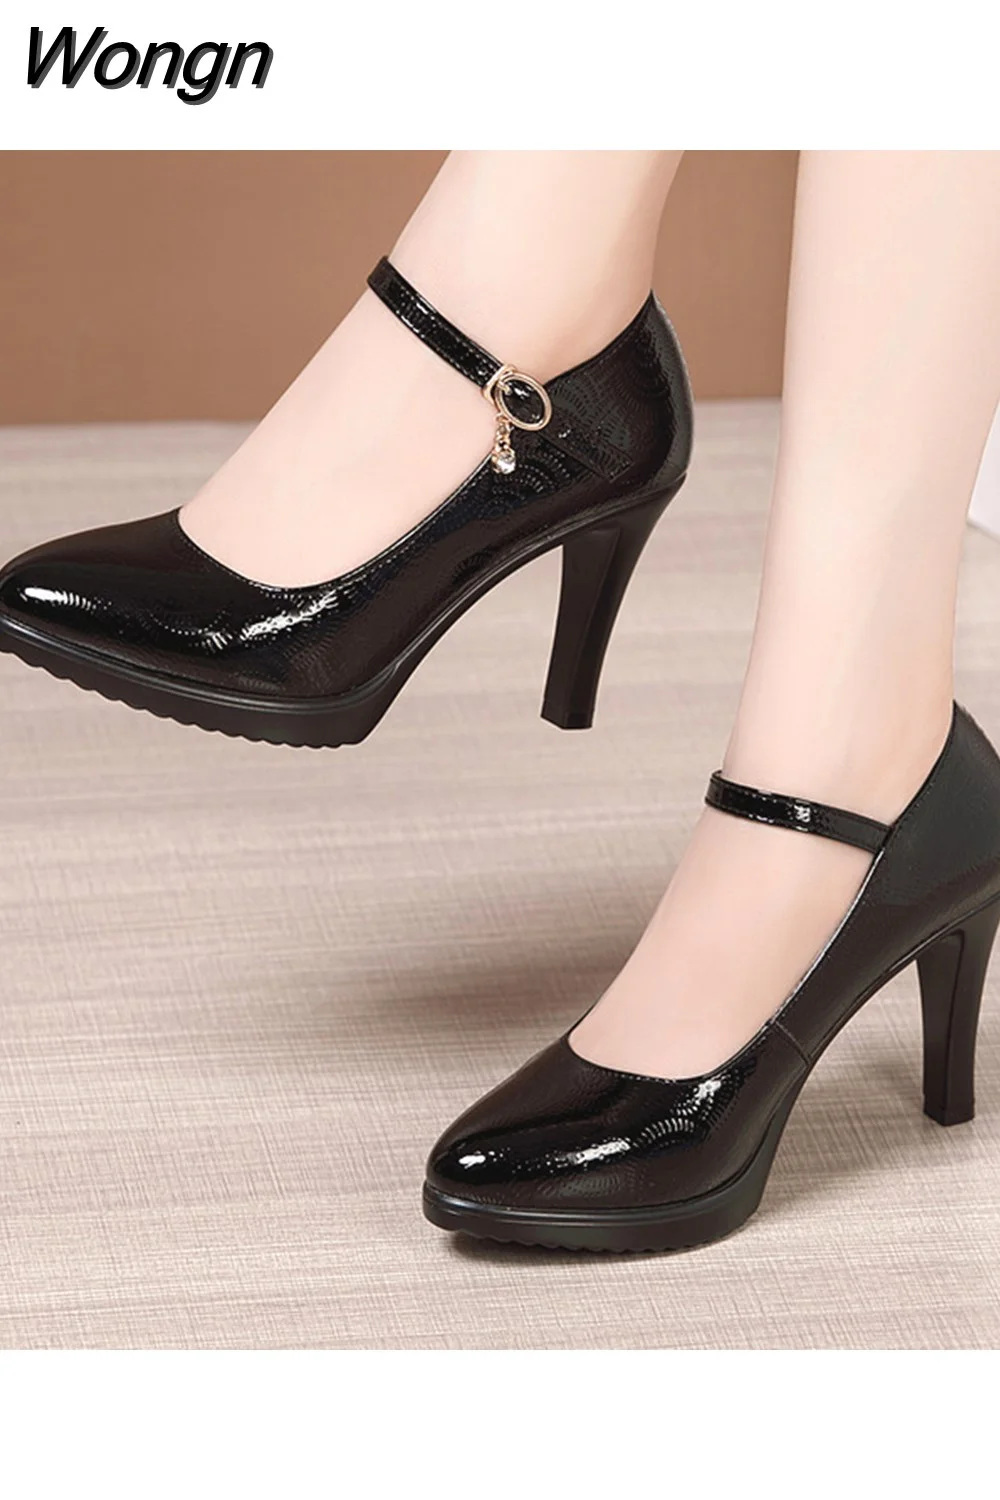 Wongn Women's Shoes Pumps Pointed Toe Office Lady Pumps Patent Leather Sexy High Heels Women's Wedding Shoes Plus Size 32-43